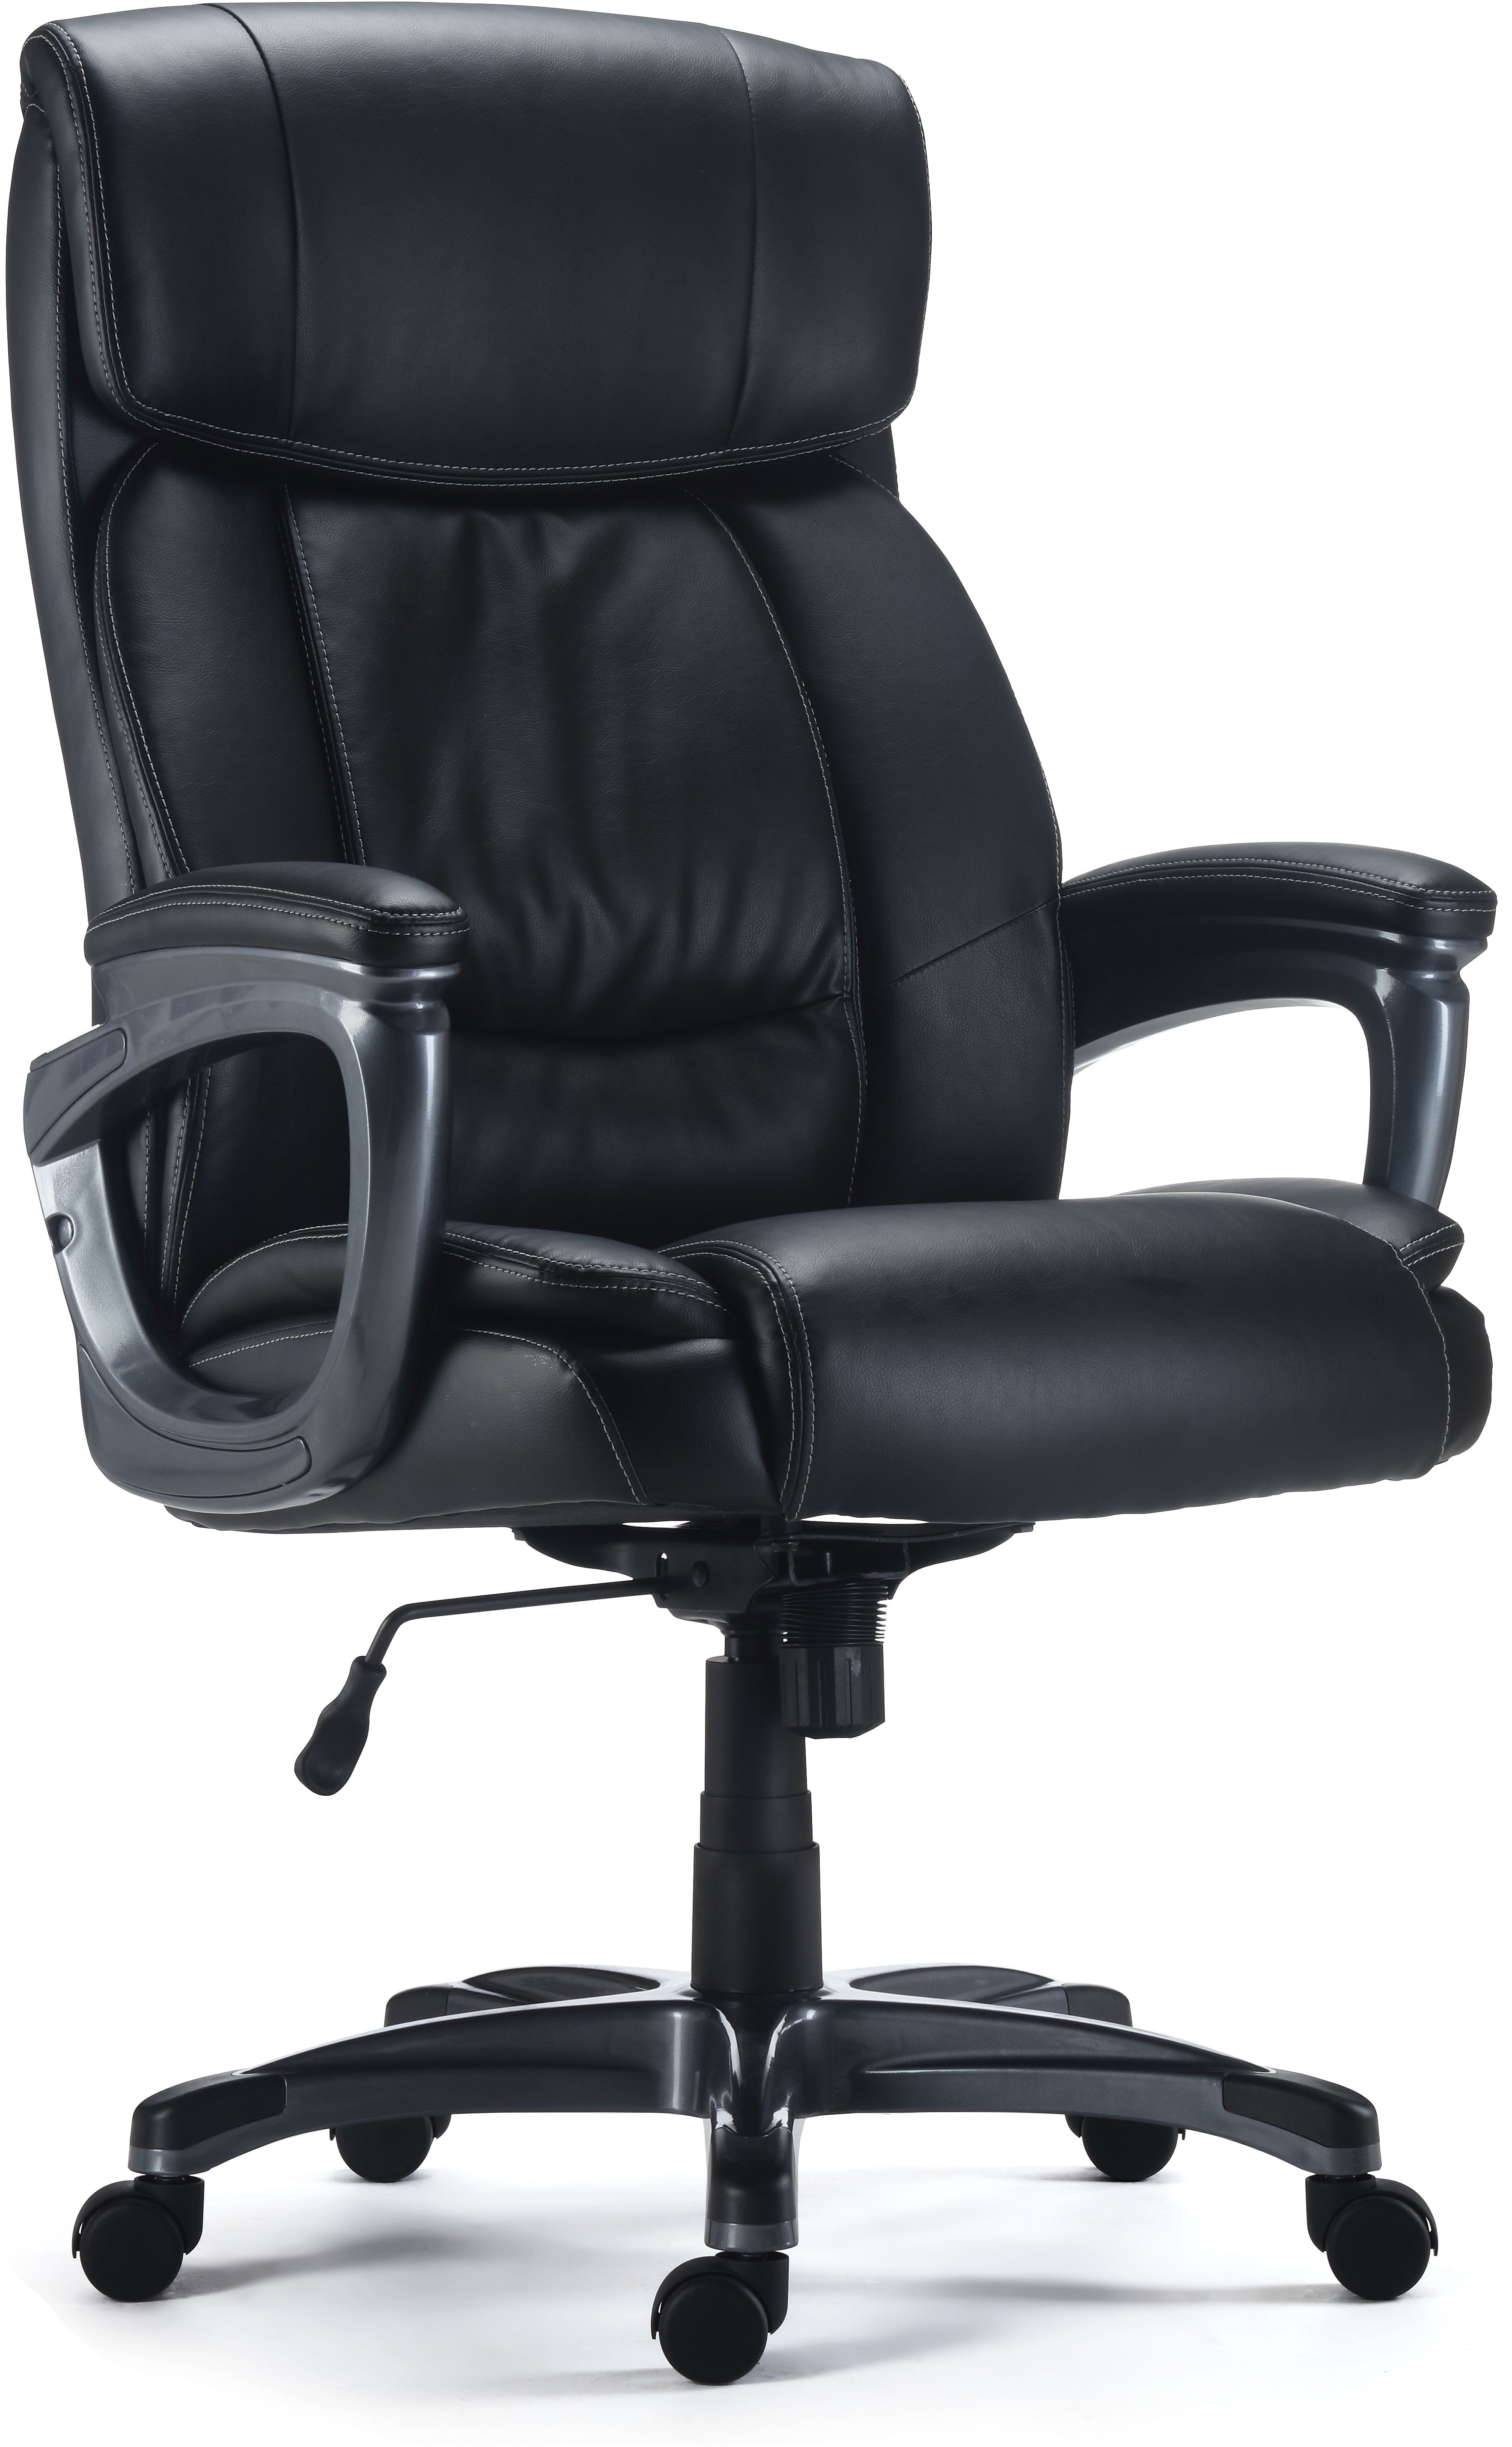 492943 9339BK Details about   Global Airflow Mesh Back Leather Manager Chair Black 